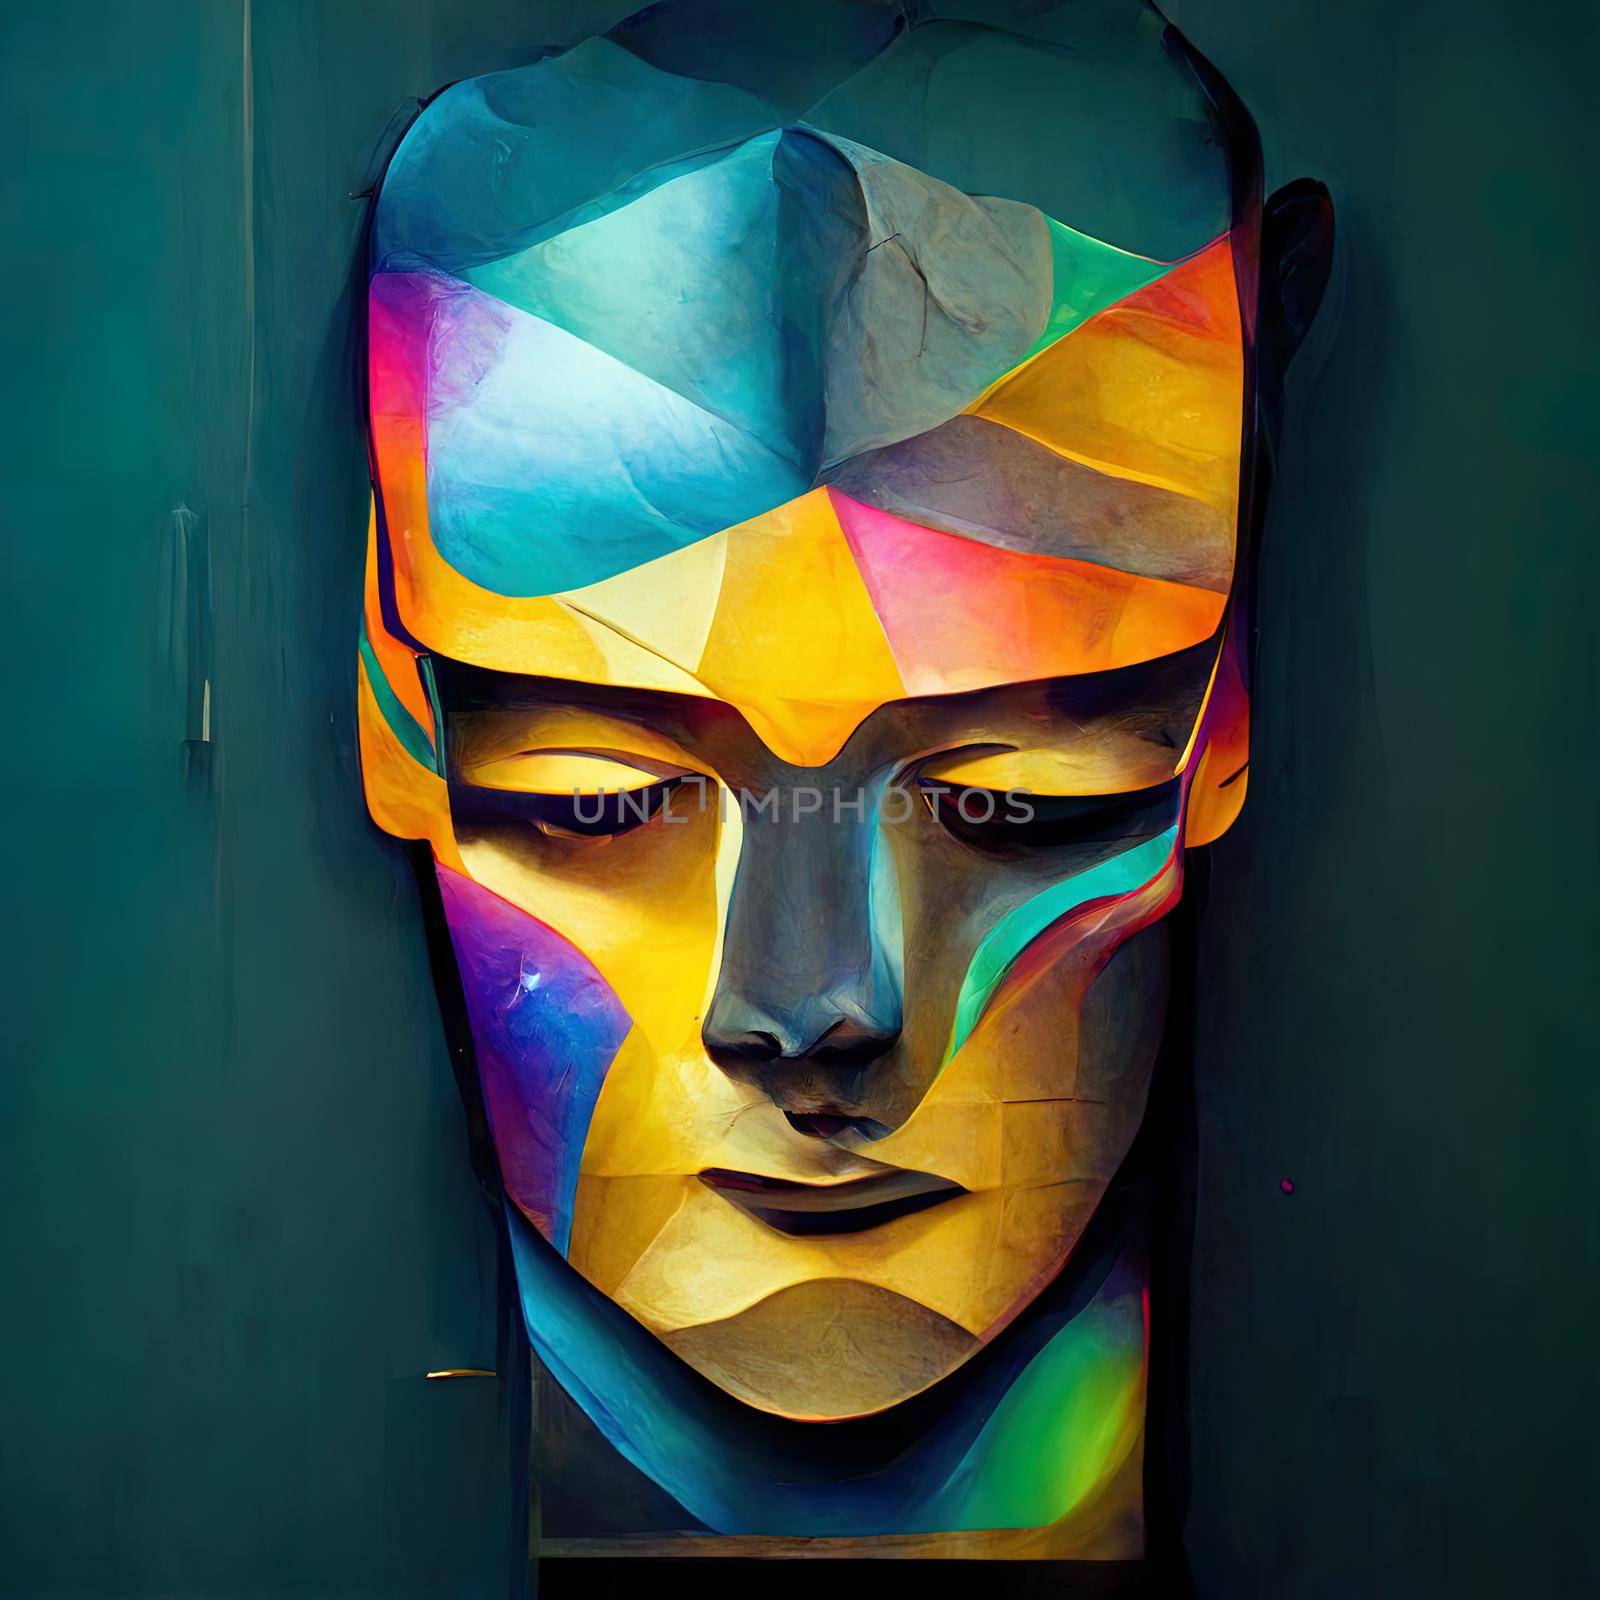 Abstract illustration of holographic human face iridescent material